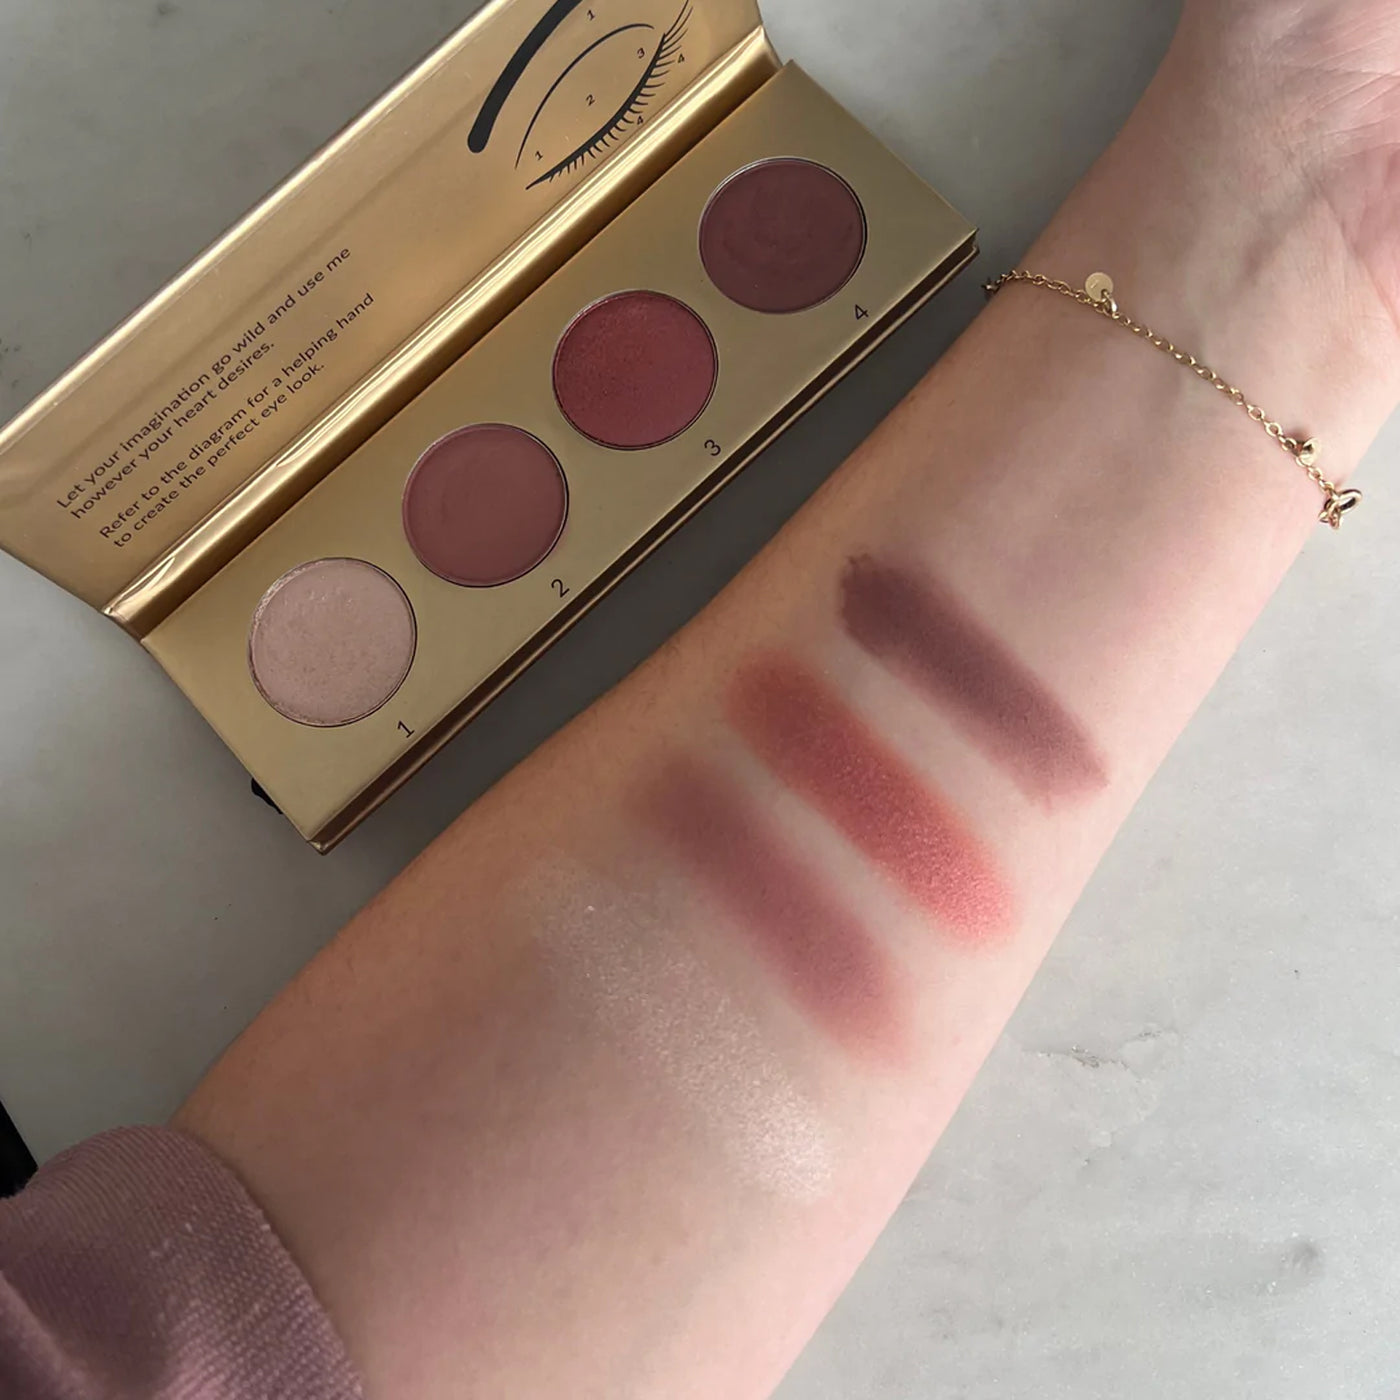 Eco Tan Ruby Palette (4 x 2g) as applied to the skin